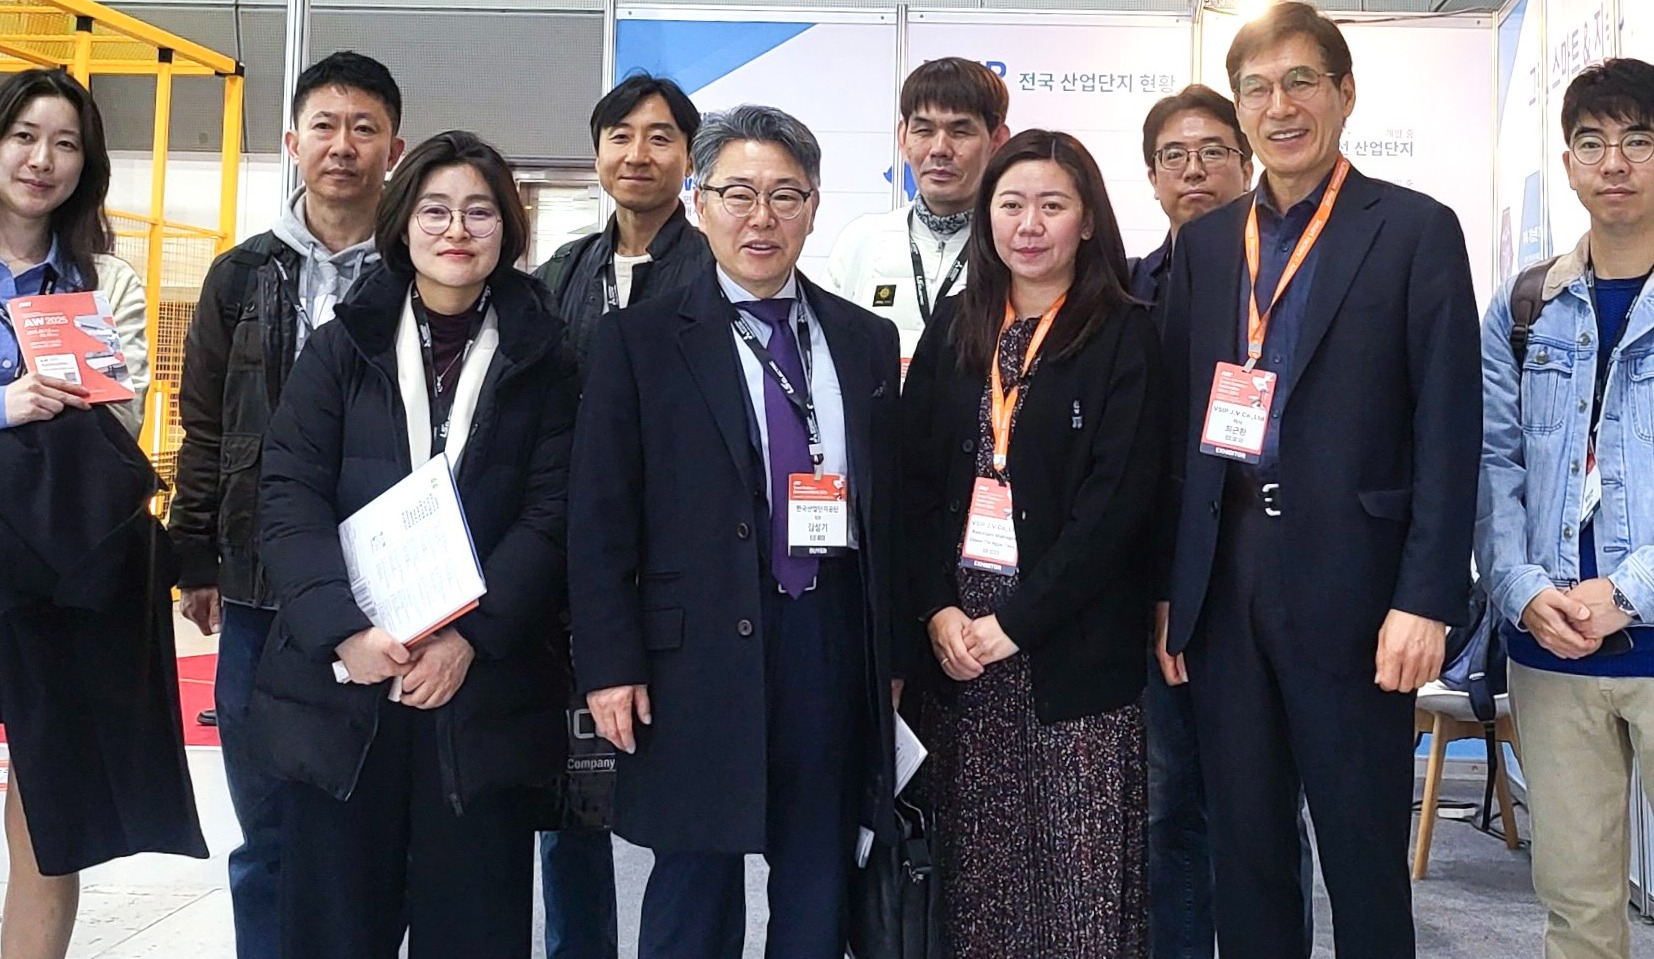 VSIP JOINS “SMART FACTORY AND AUTOMATION WORLD 2024” “Smart Factory + Automation World in 2024” in Seoul